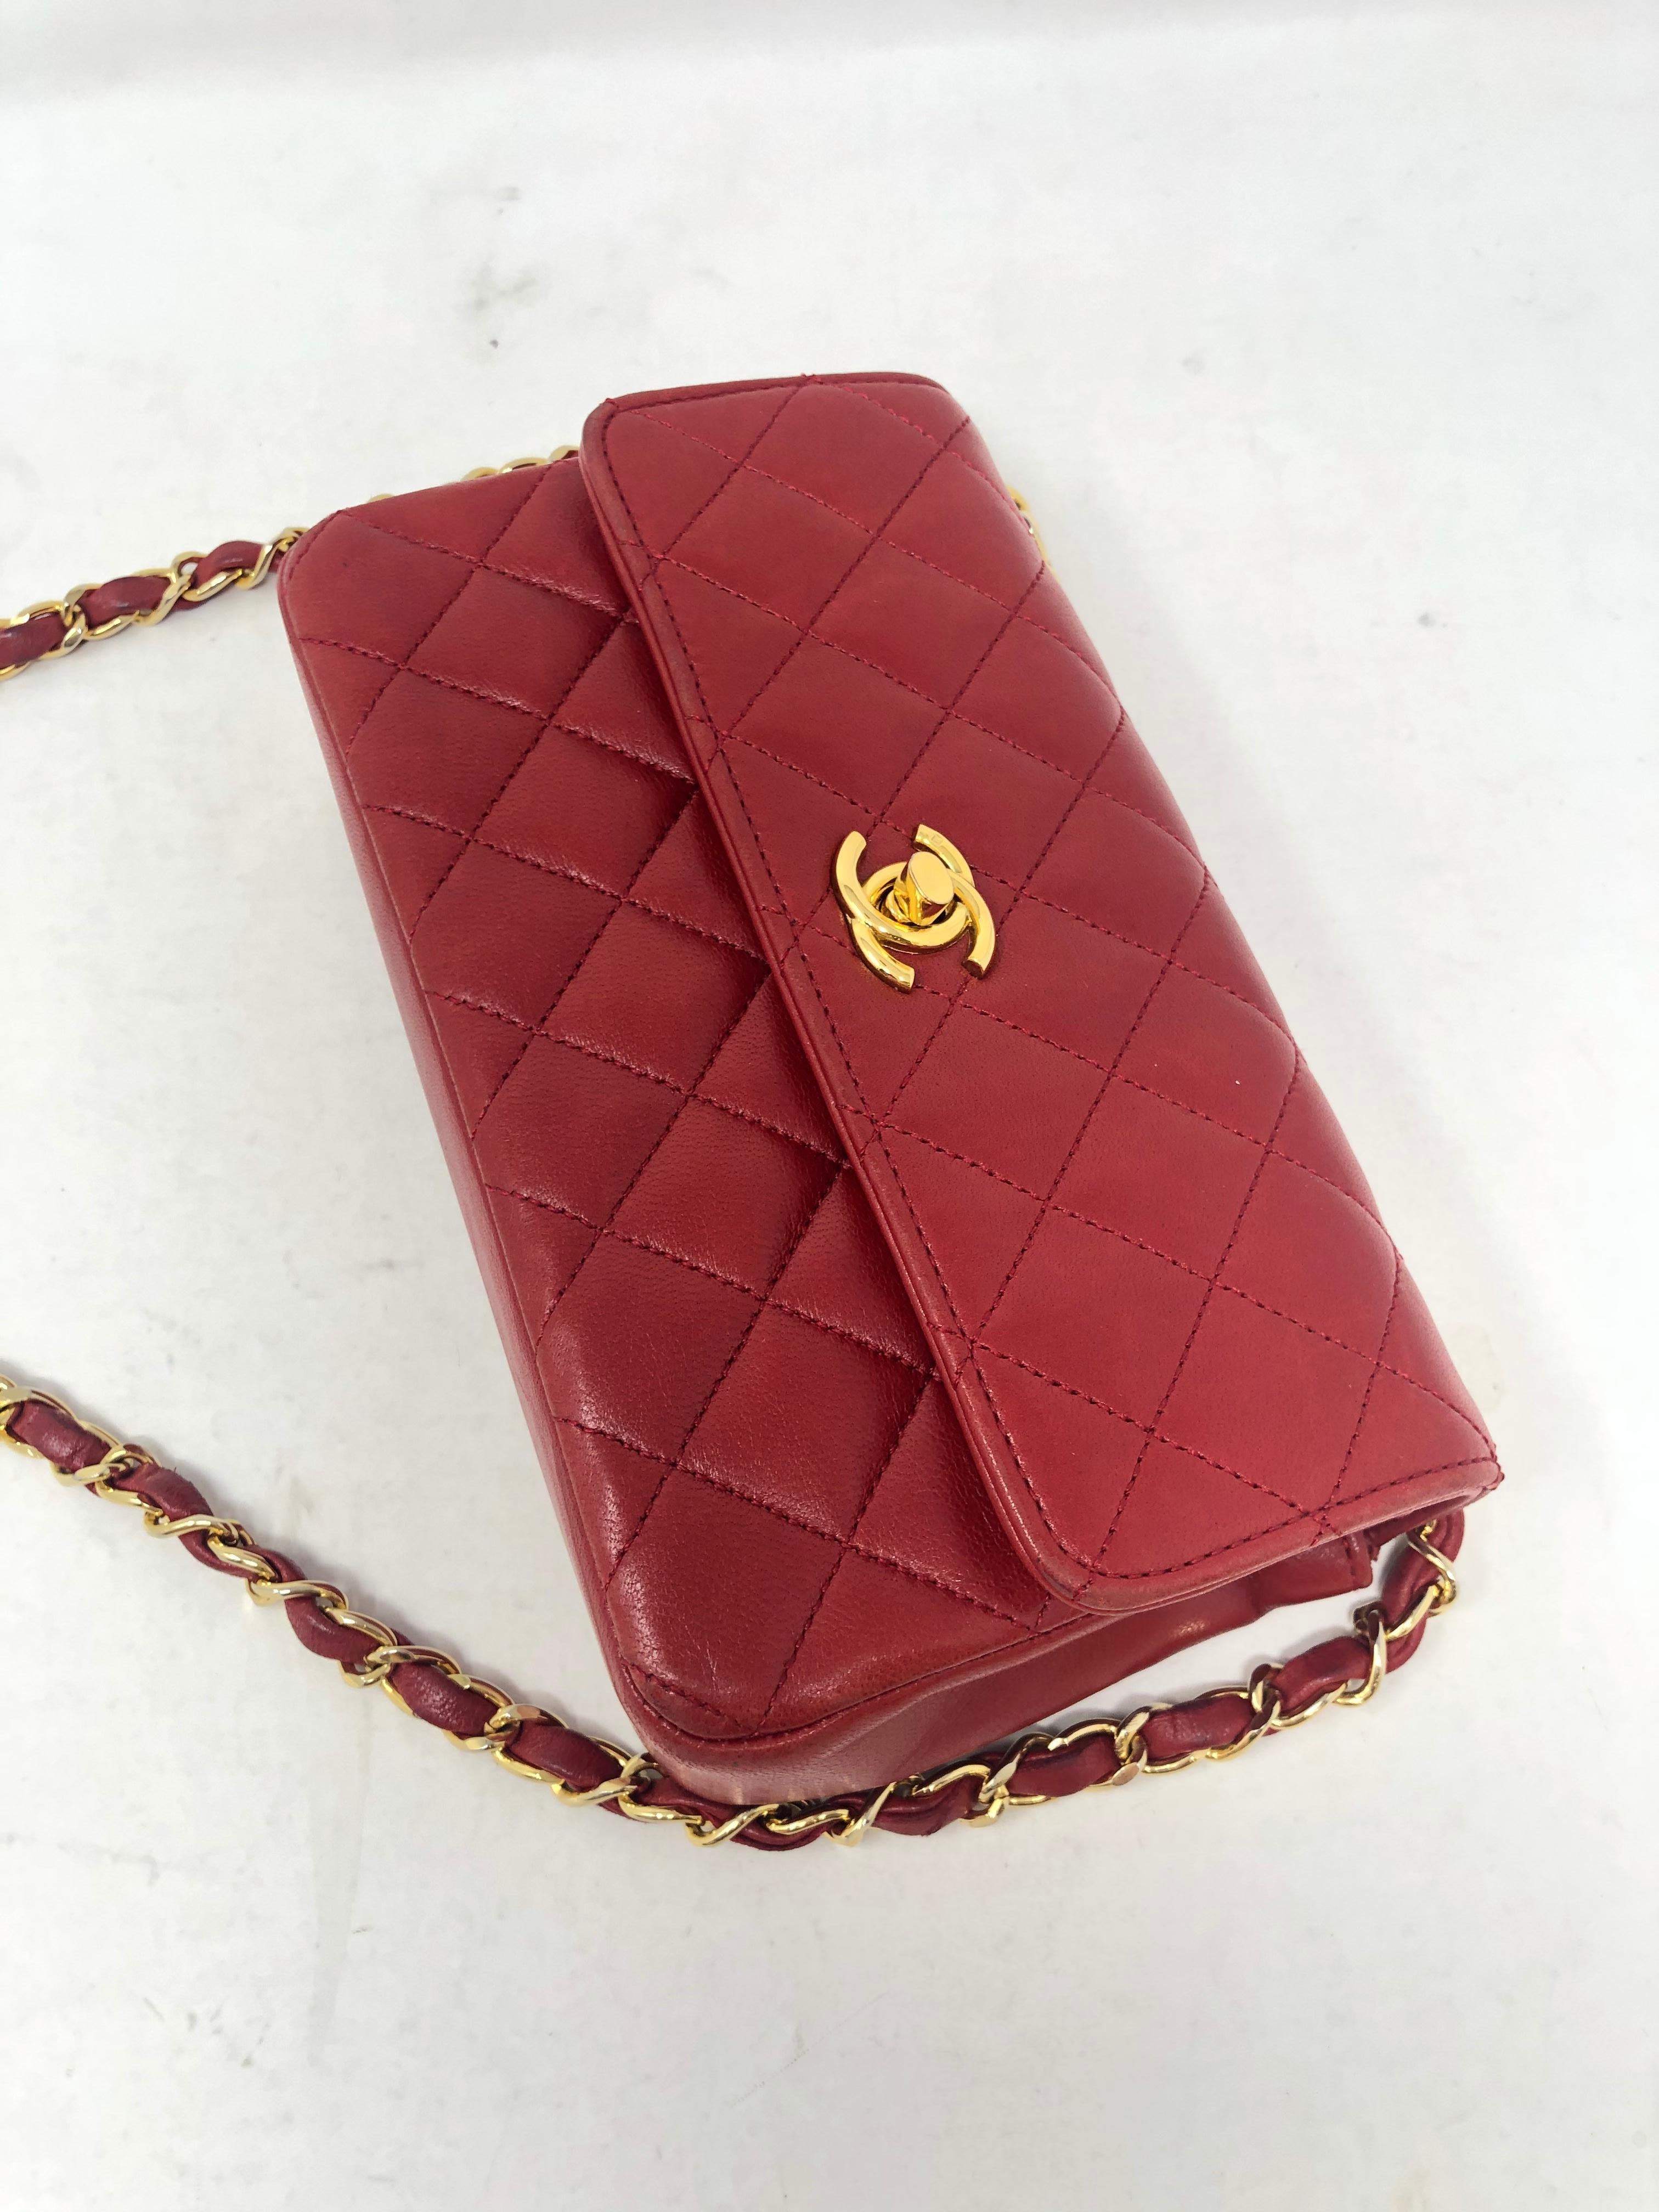 Chanel Red Mini Lambskin Crossbody Bag. Mint condition. Vintage Chanel with gold hardware. Guaranteed authentic. 